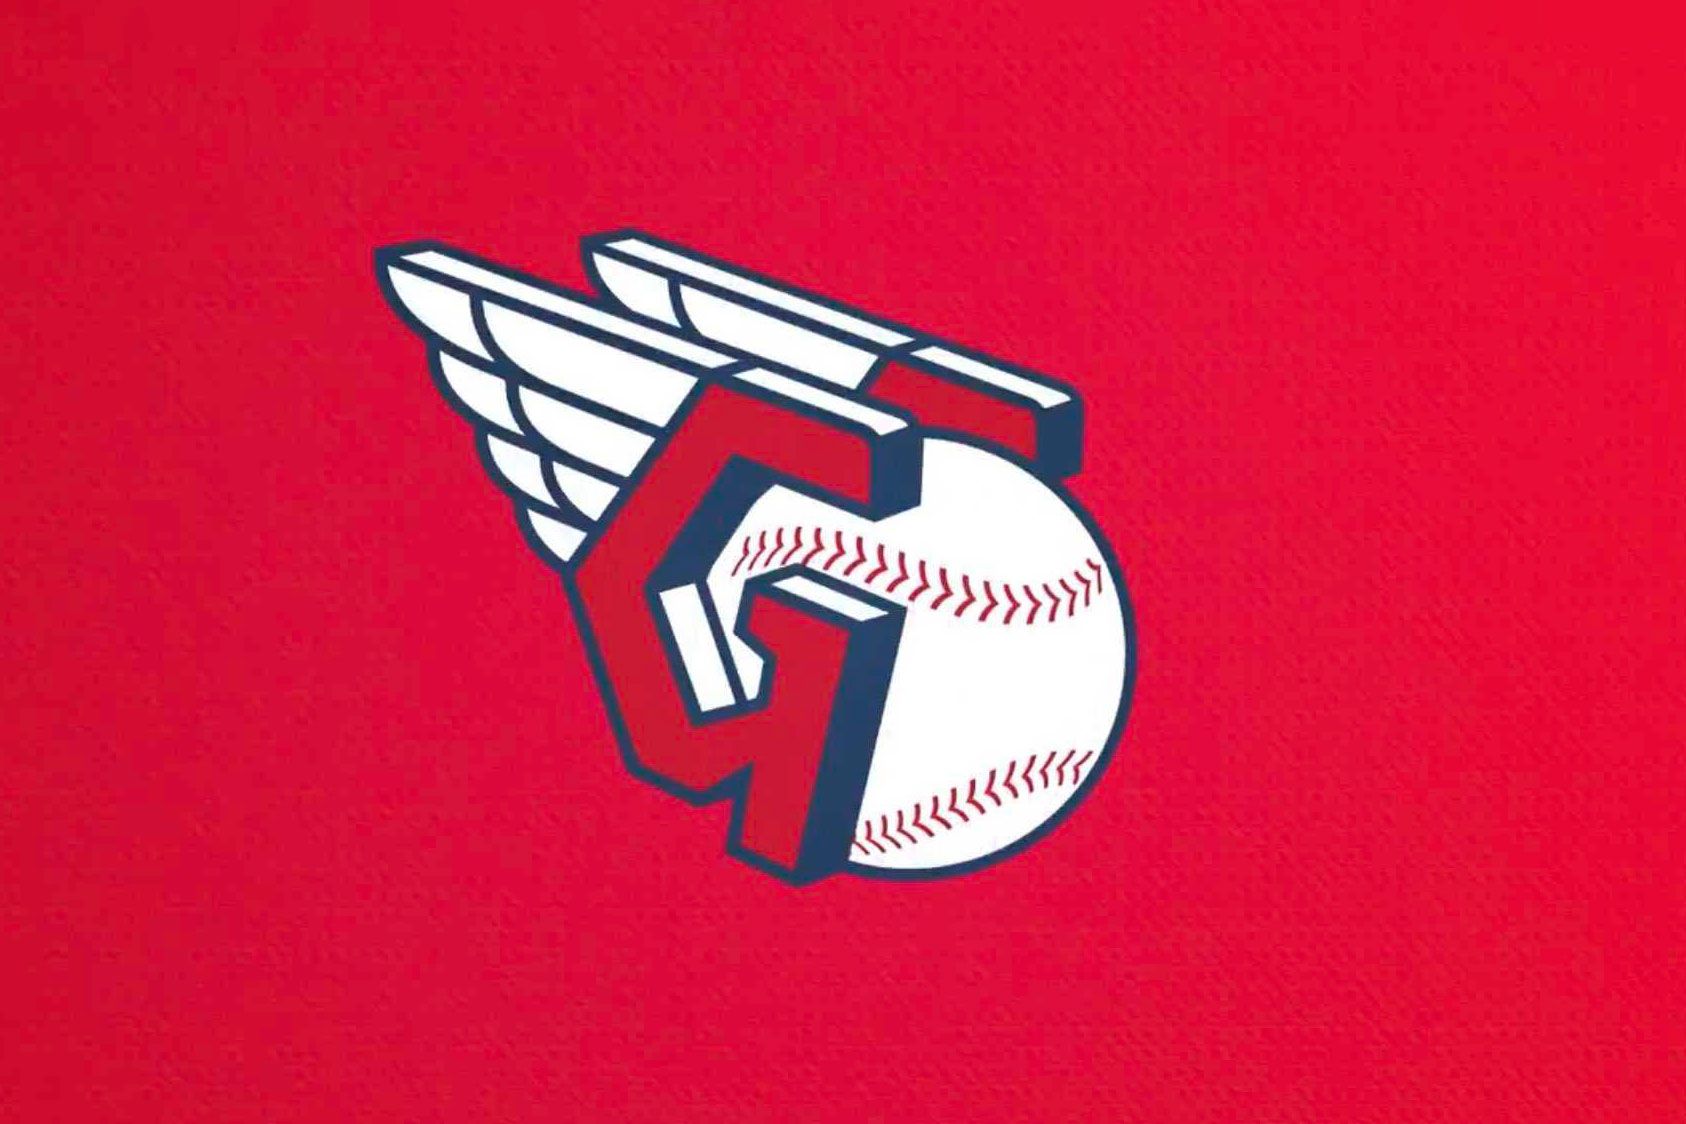 Cleveland Indians Changes Name to Guardians